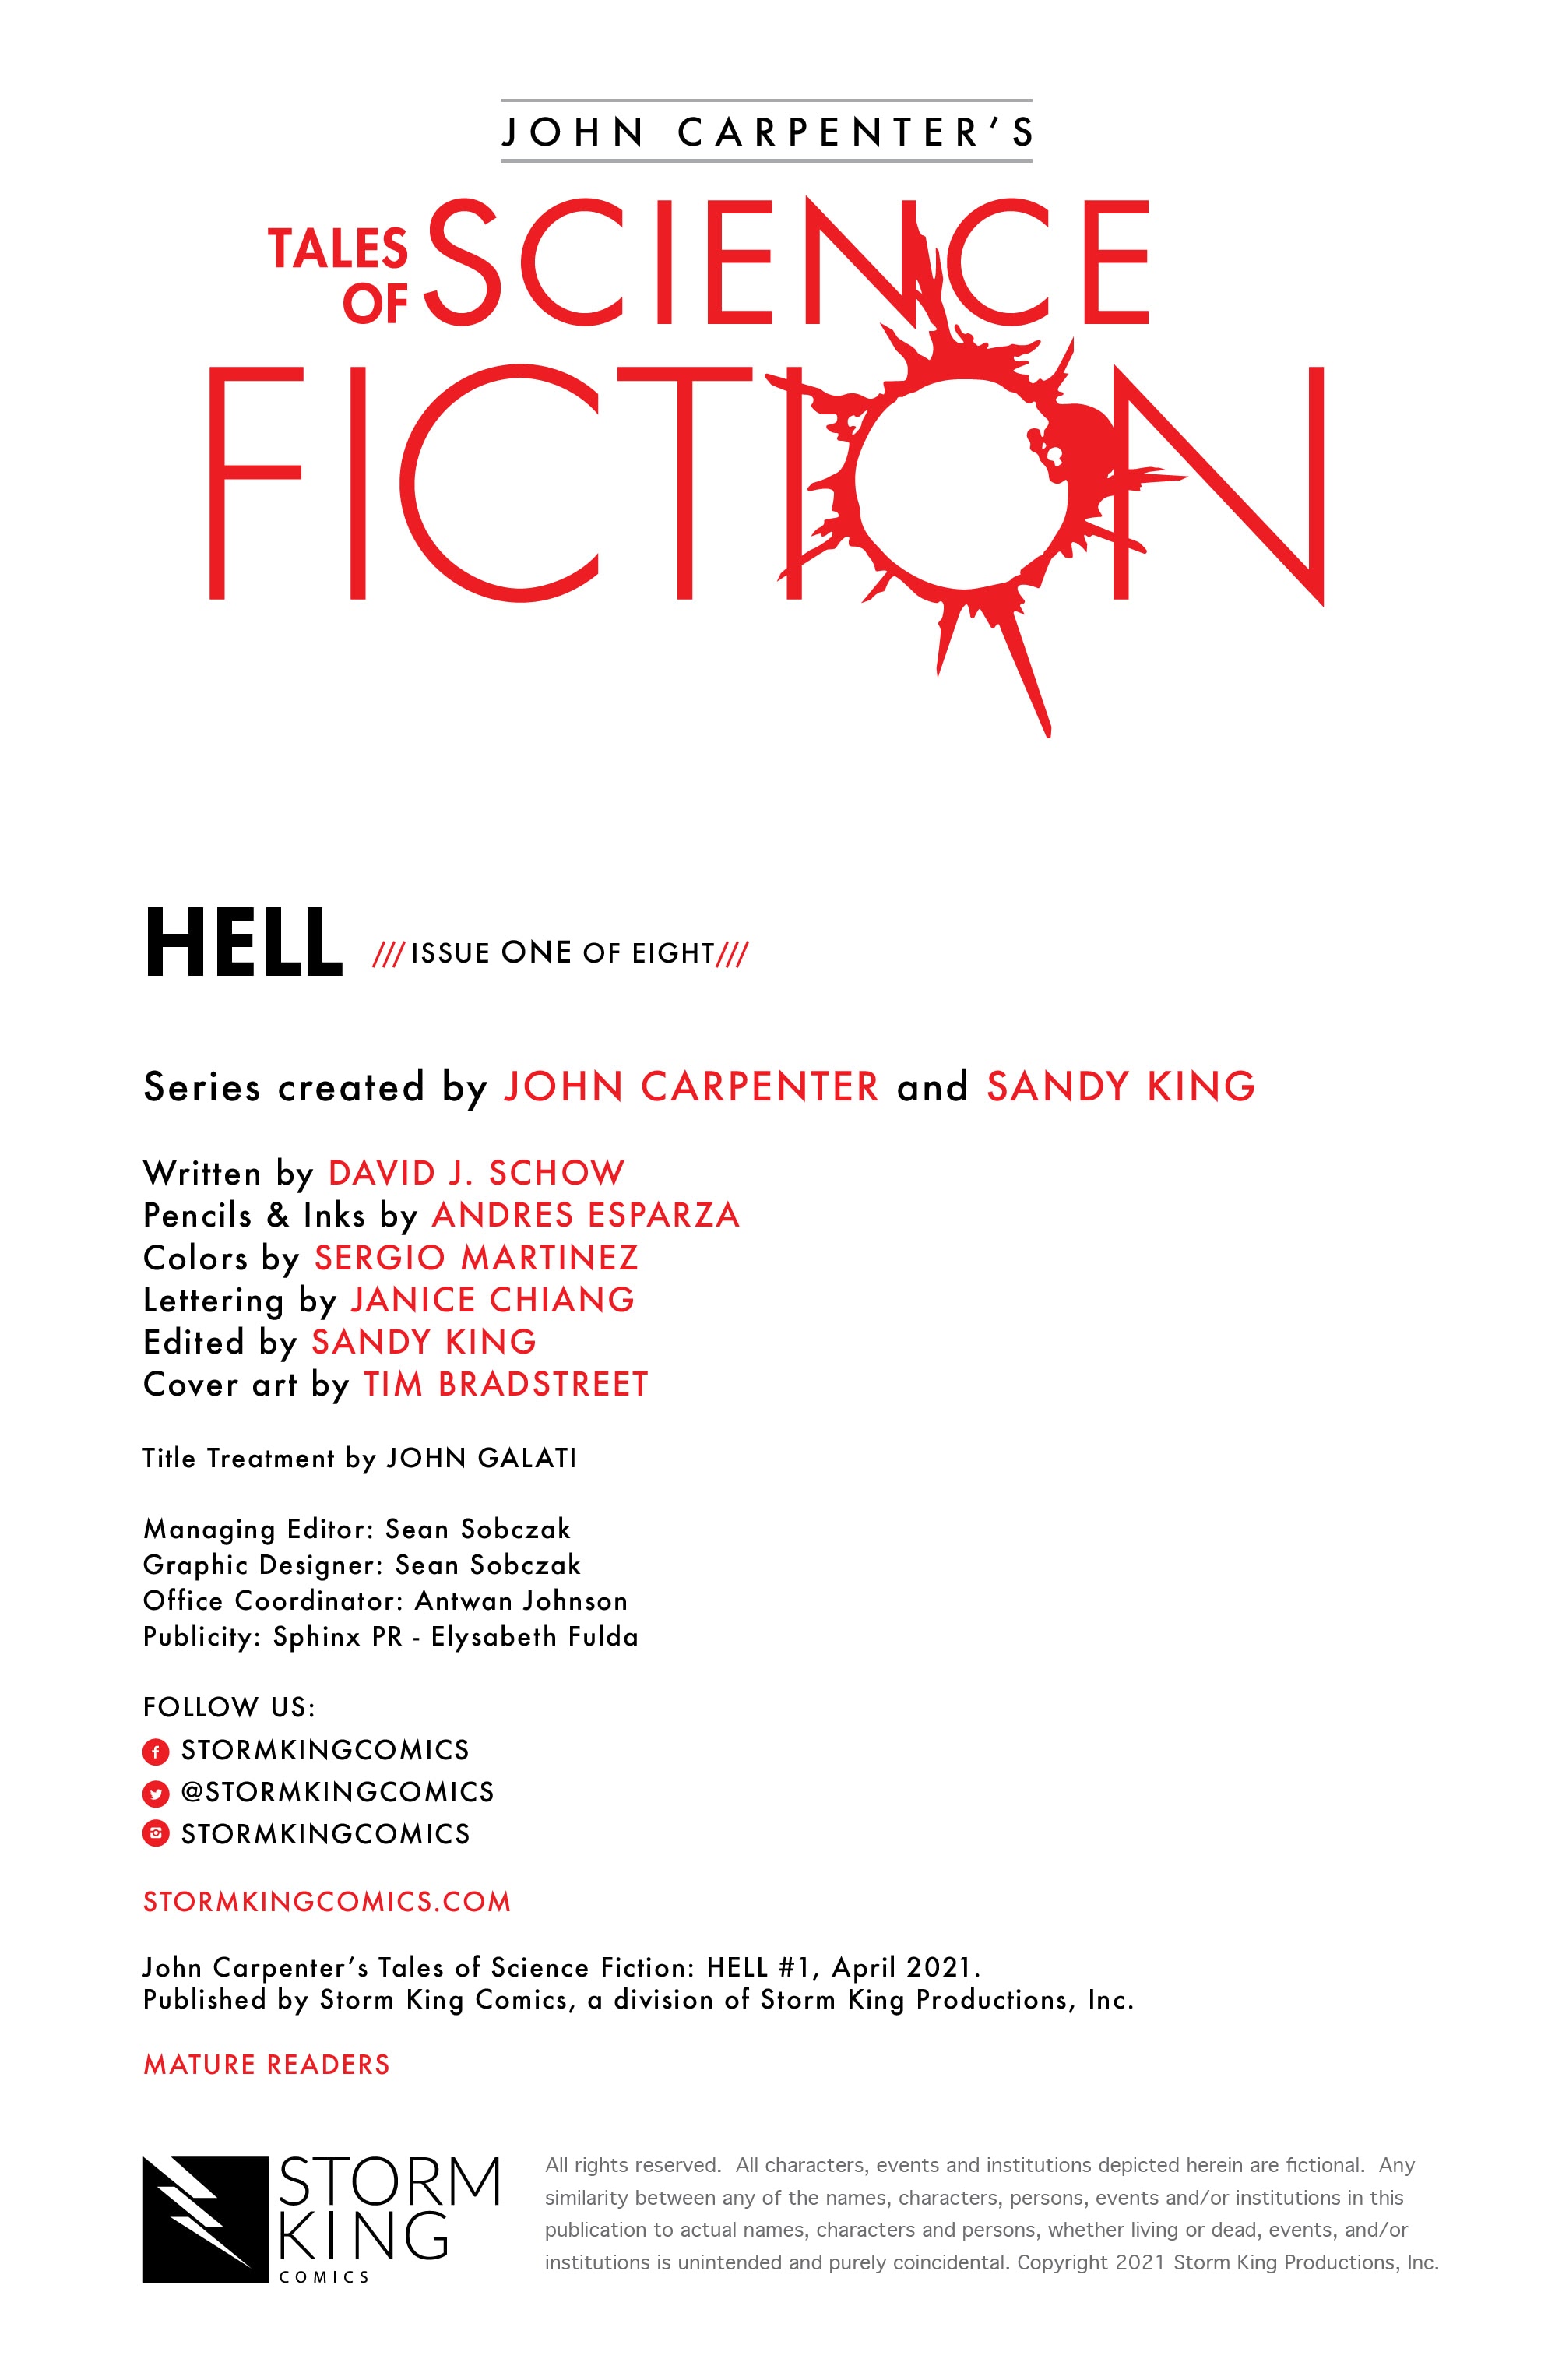 Read online John Carpenter's Tales of Science Fiction: HELL comic -  Issue #1 - 2